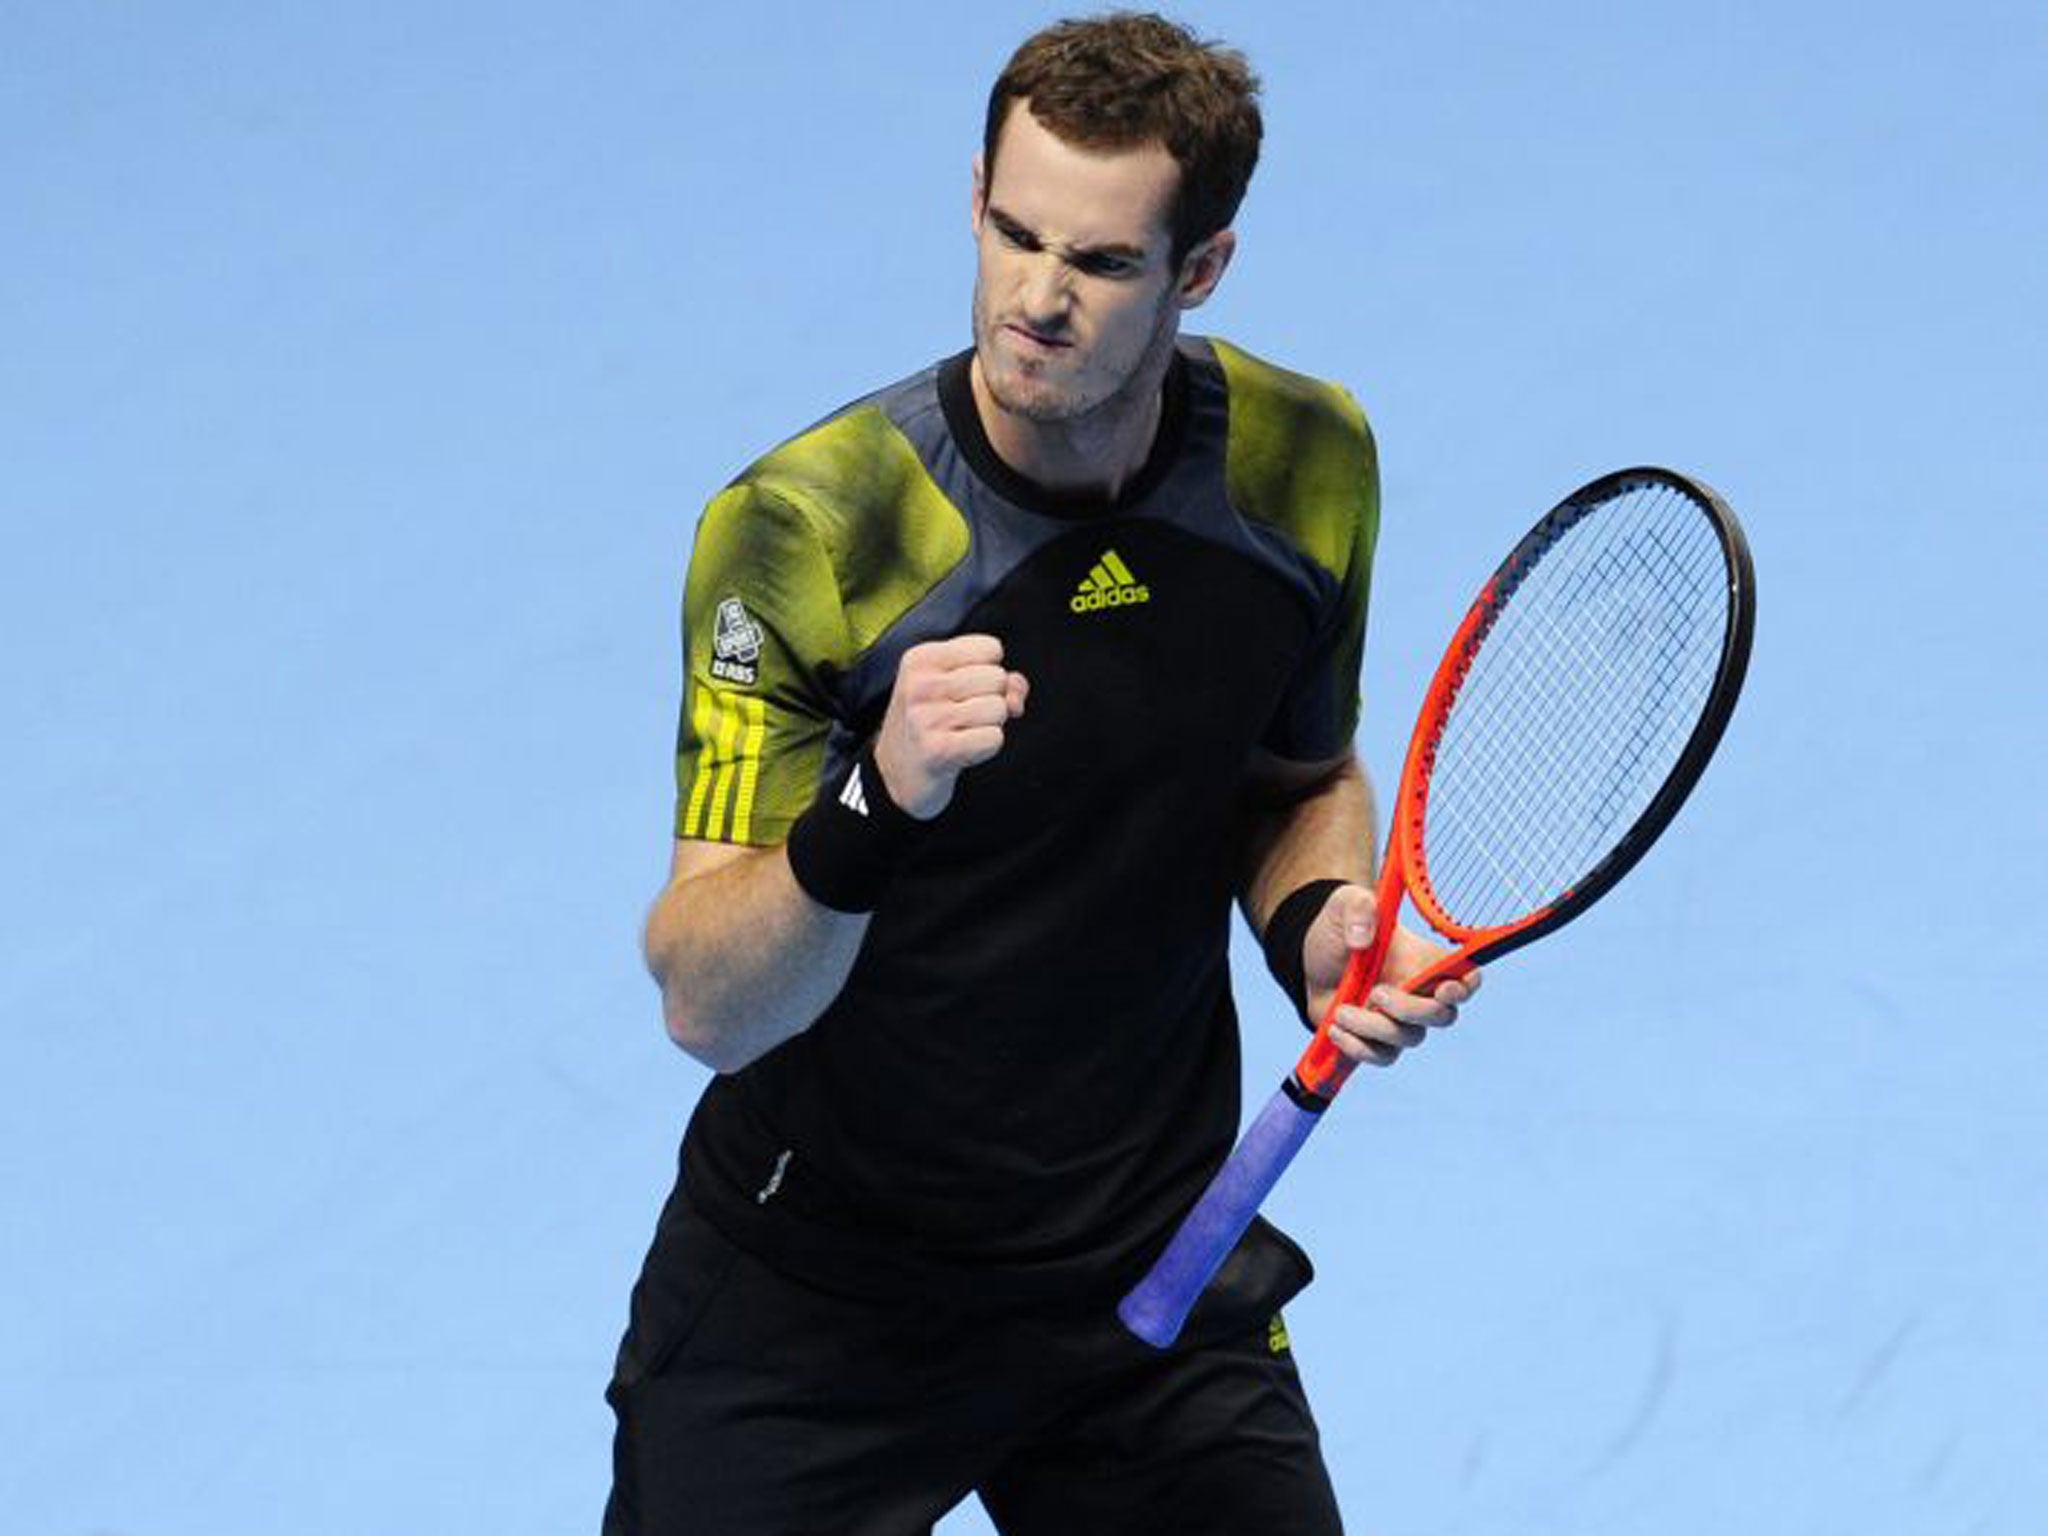 Andy Murray (Great Britain, aged 25, world no 3)